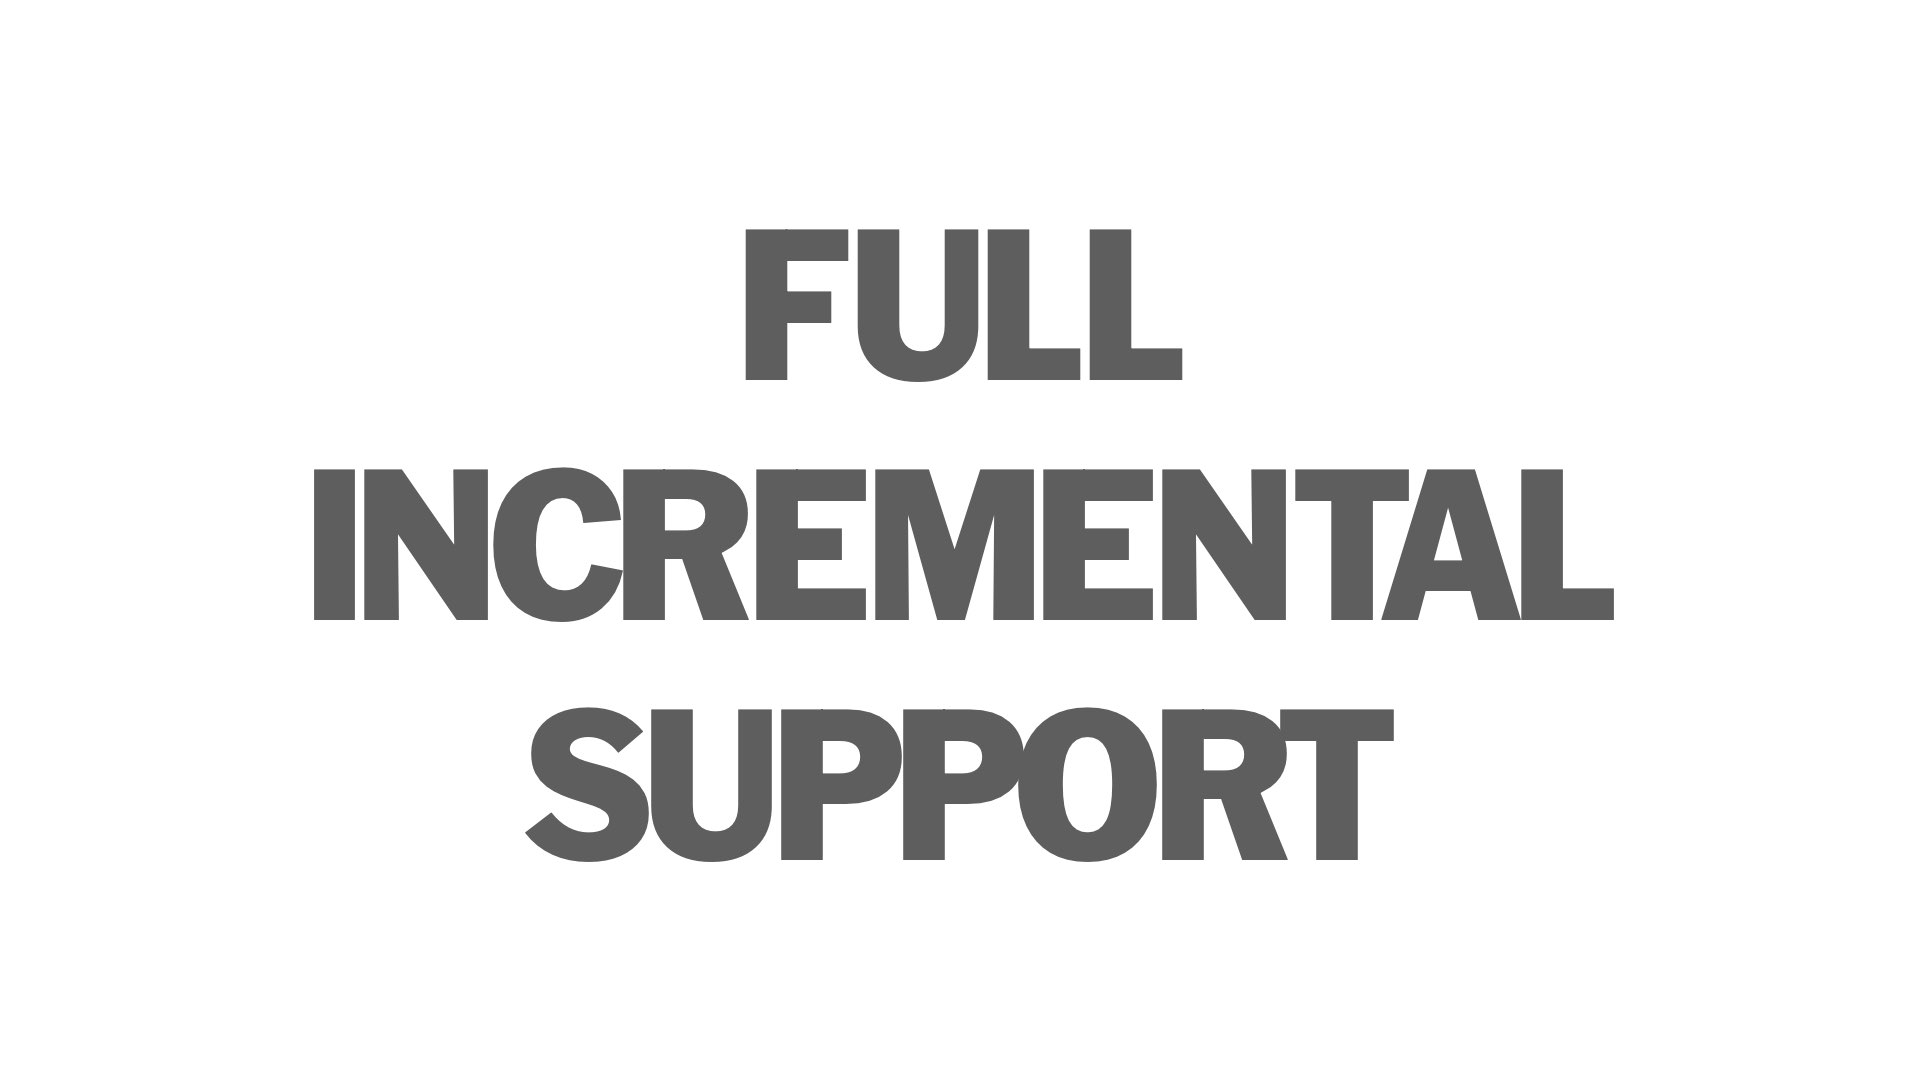 Full incremental support